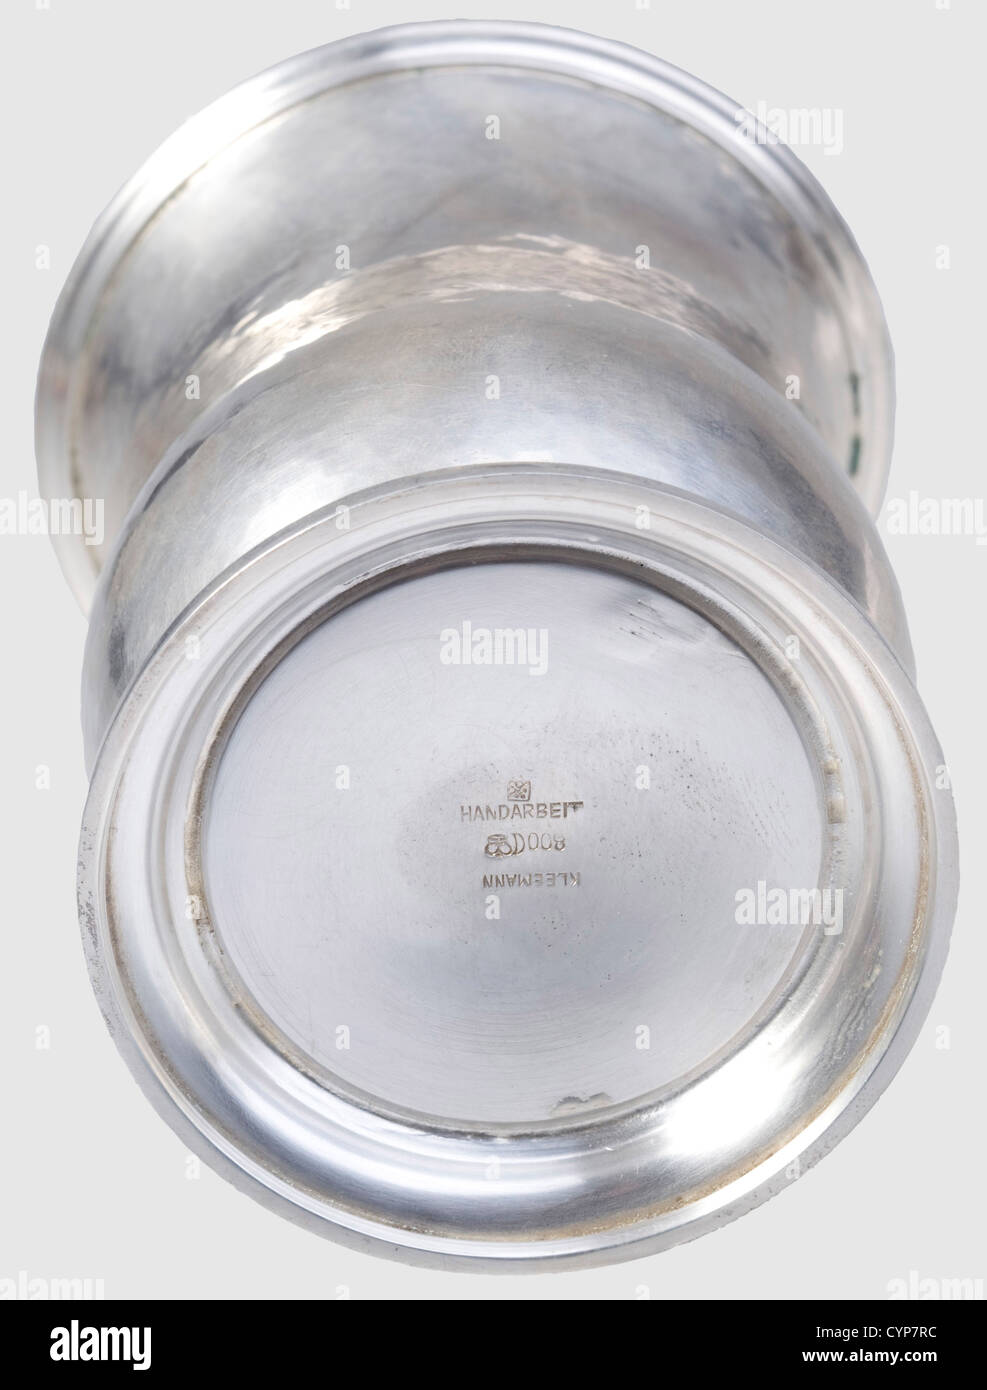 Hermann and Emmy Göring - three silver beakers, as previous. Height 8.8 cm each, weights between 90 and 92 g, historic, historical, 1930s, 1930s, 20th century, NS, National Socialism, Nazism, Third Reich, German Reich, Germany, German, National Socialist, Nazi, Nazi period, fascism, object, objects, stills, clipping, clippings, cut out, cut-out, cut-outs, fine arts, art, art object, art objects, artful, precious, collectible, collector's item, collectibles, collector's items, rarity, rarities, dishes, dish, Additional-Rights-Clearences-Not Available Stock Photo